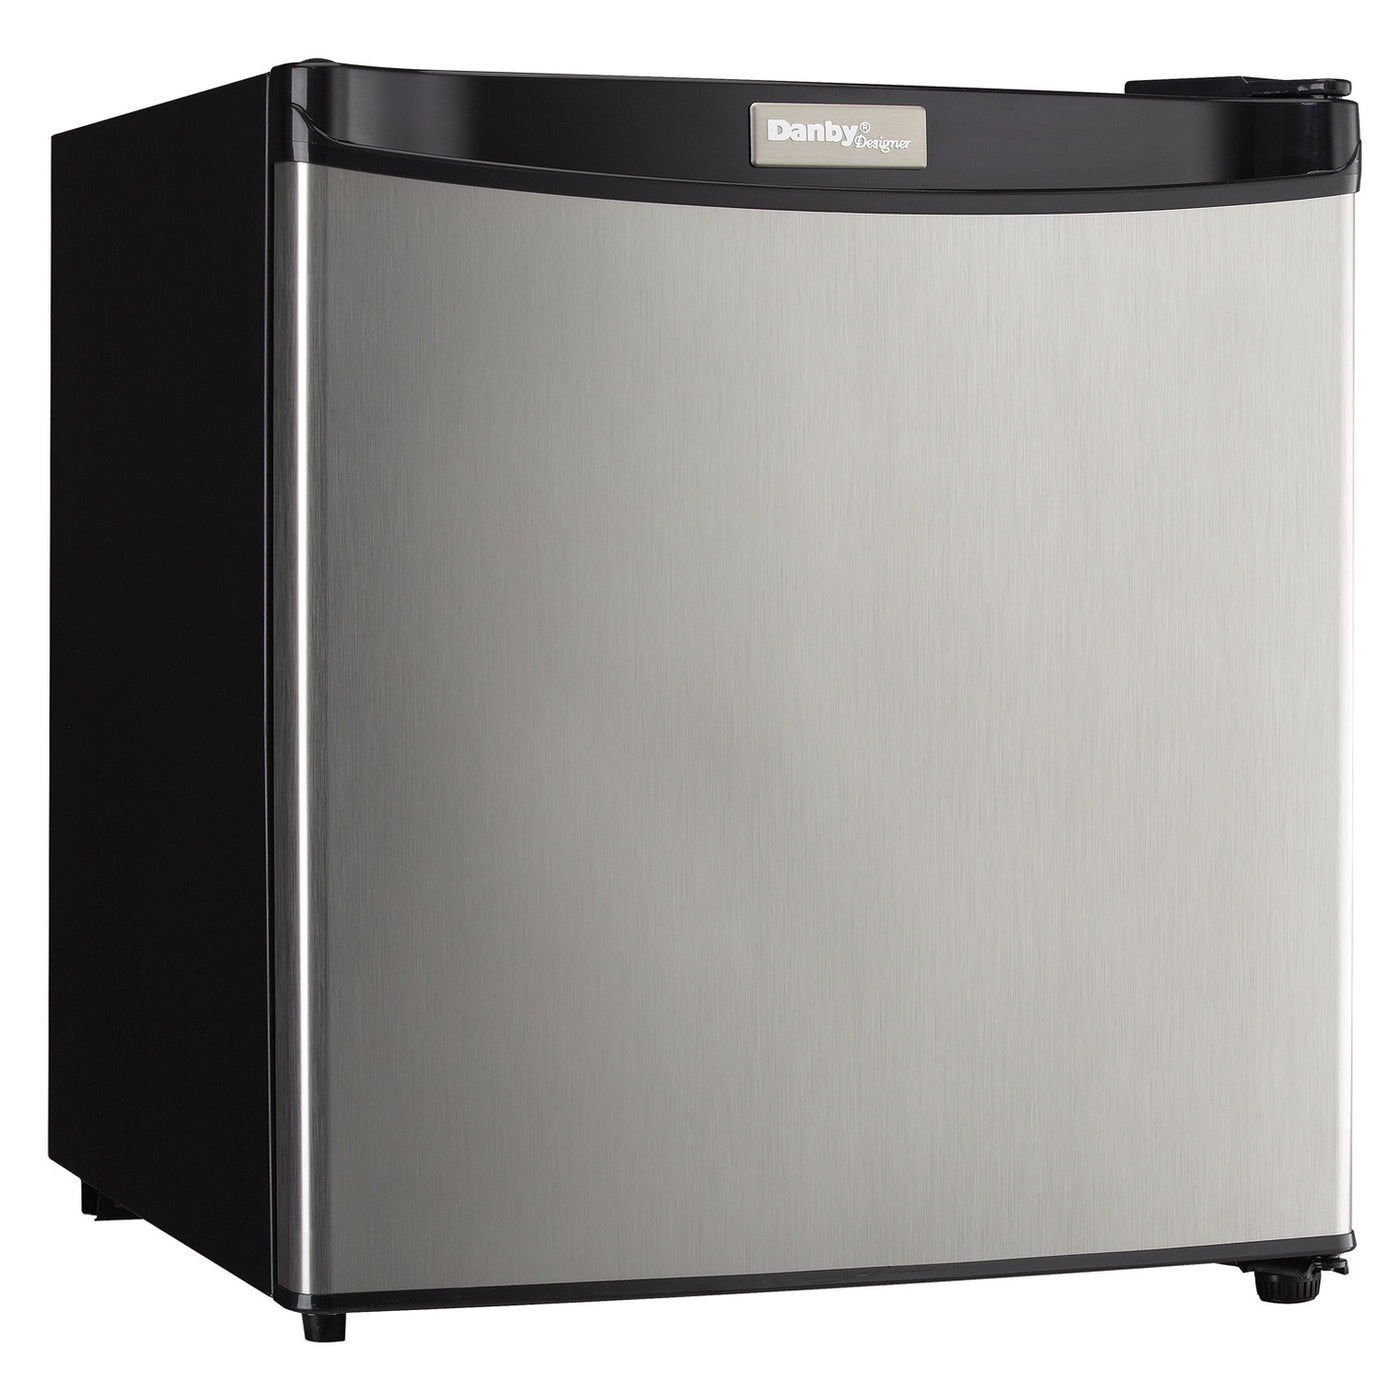 Danby Stainless Steel Compact Refrigerator (1.6 Cu. Ft ...